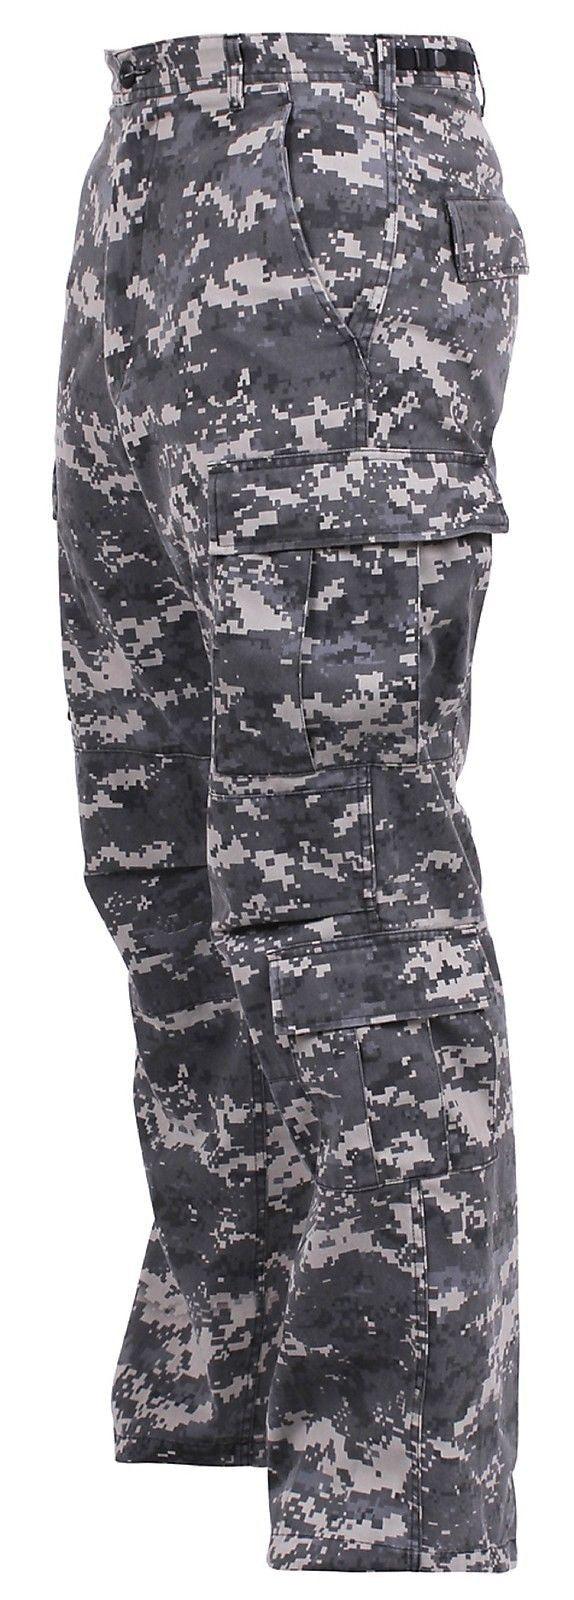 Men's Subdued Urban Digital Camouflage Military Fatigue Cargo Pants S ...